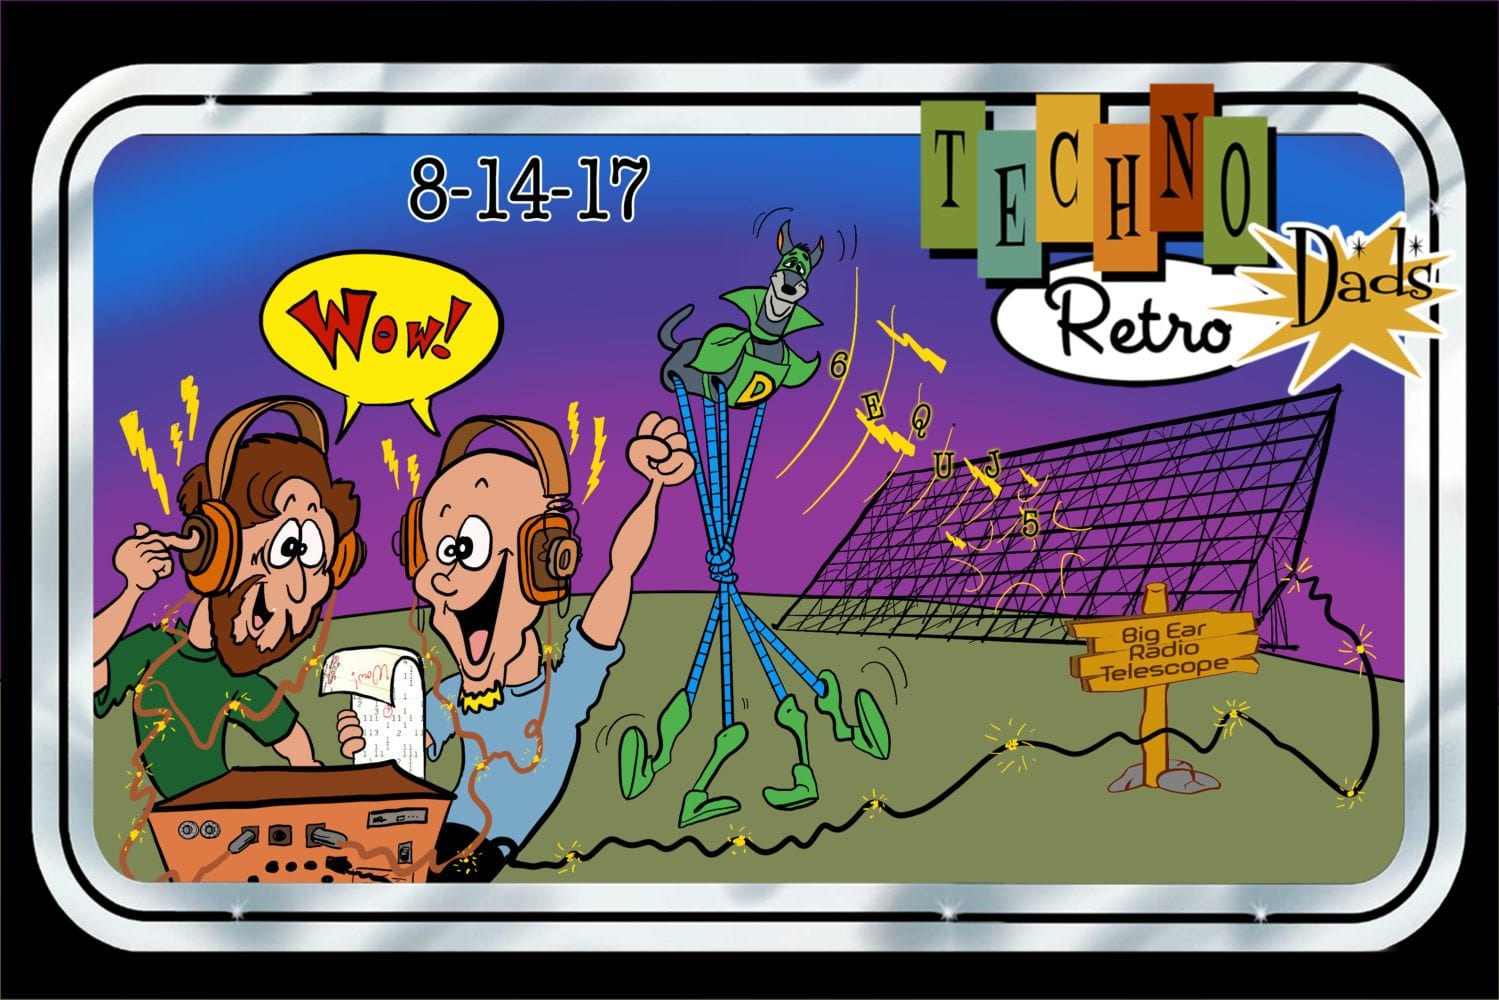 TechnoRetro Dads: WOW! SETI Signal Sent by Six-Fingered Sagittarians in 77